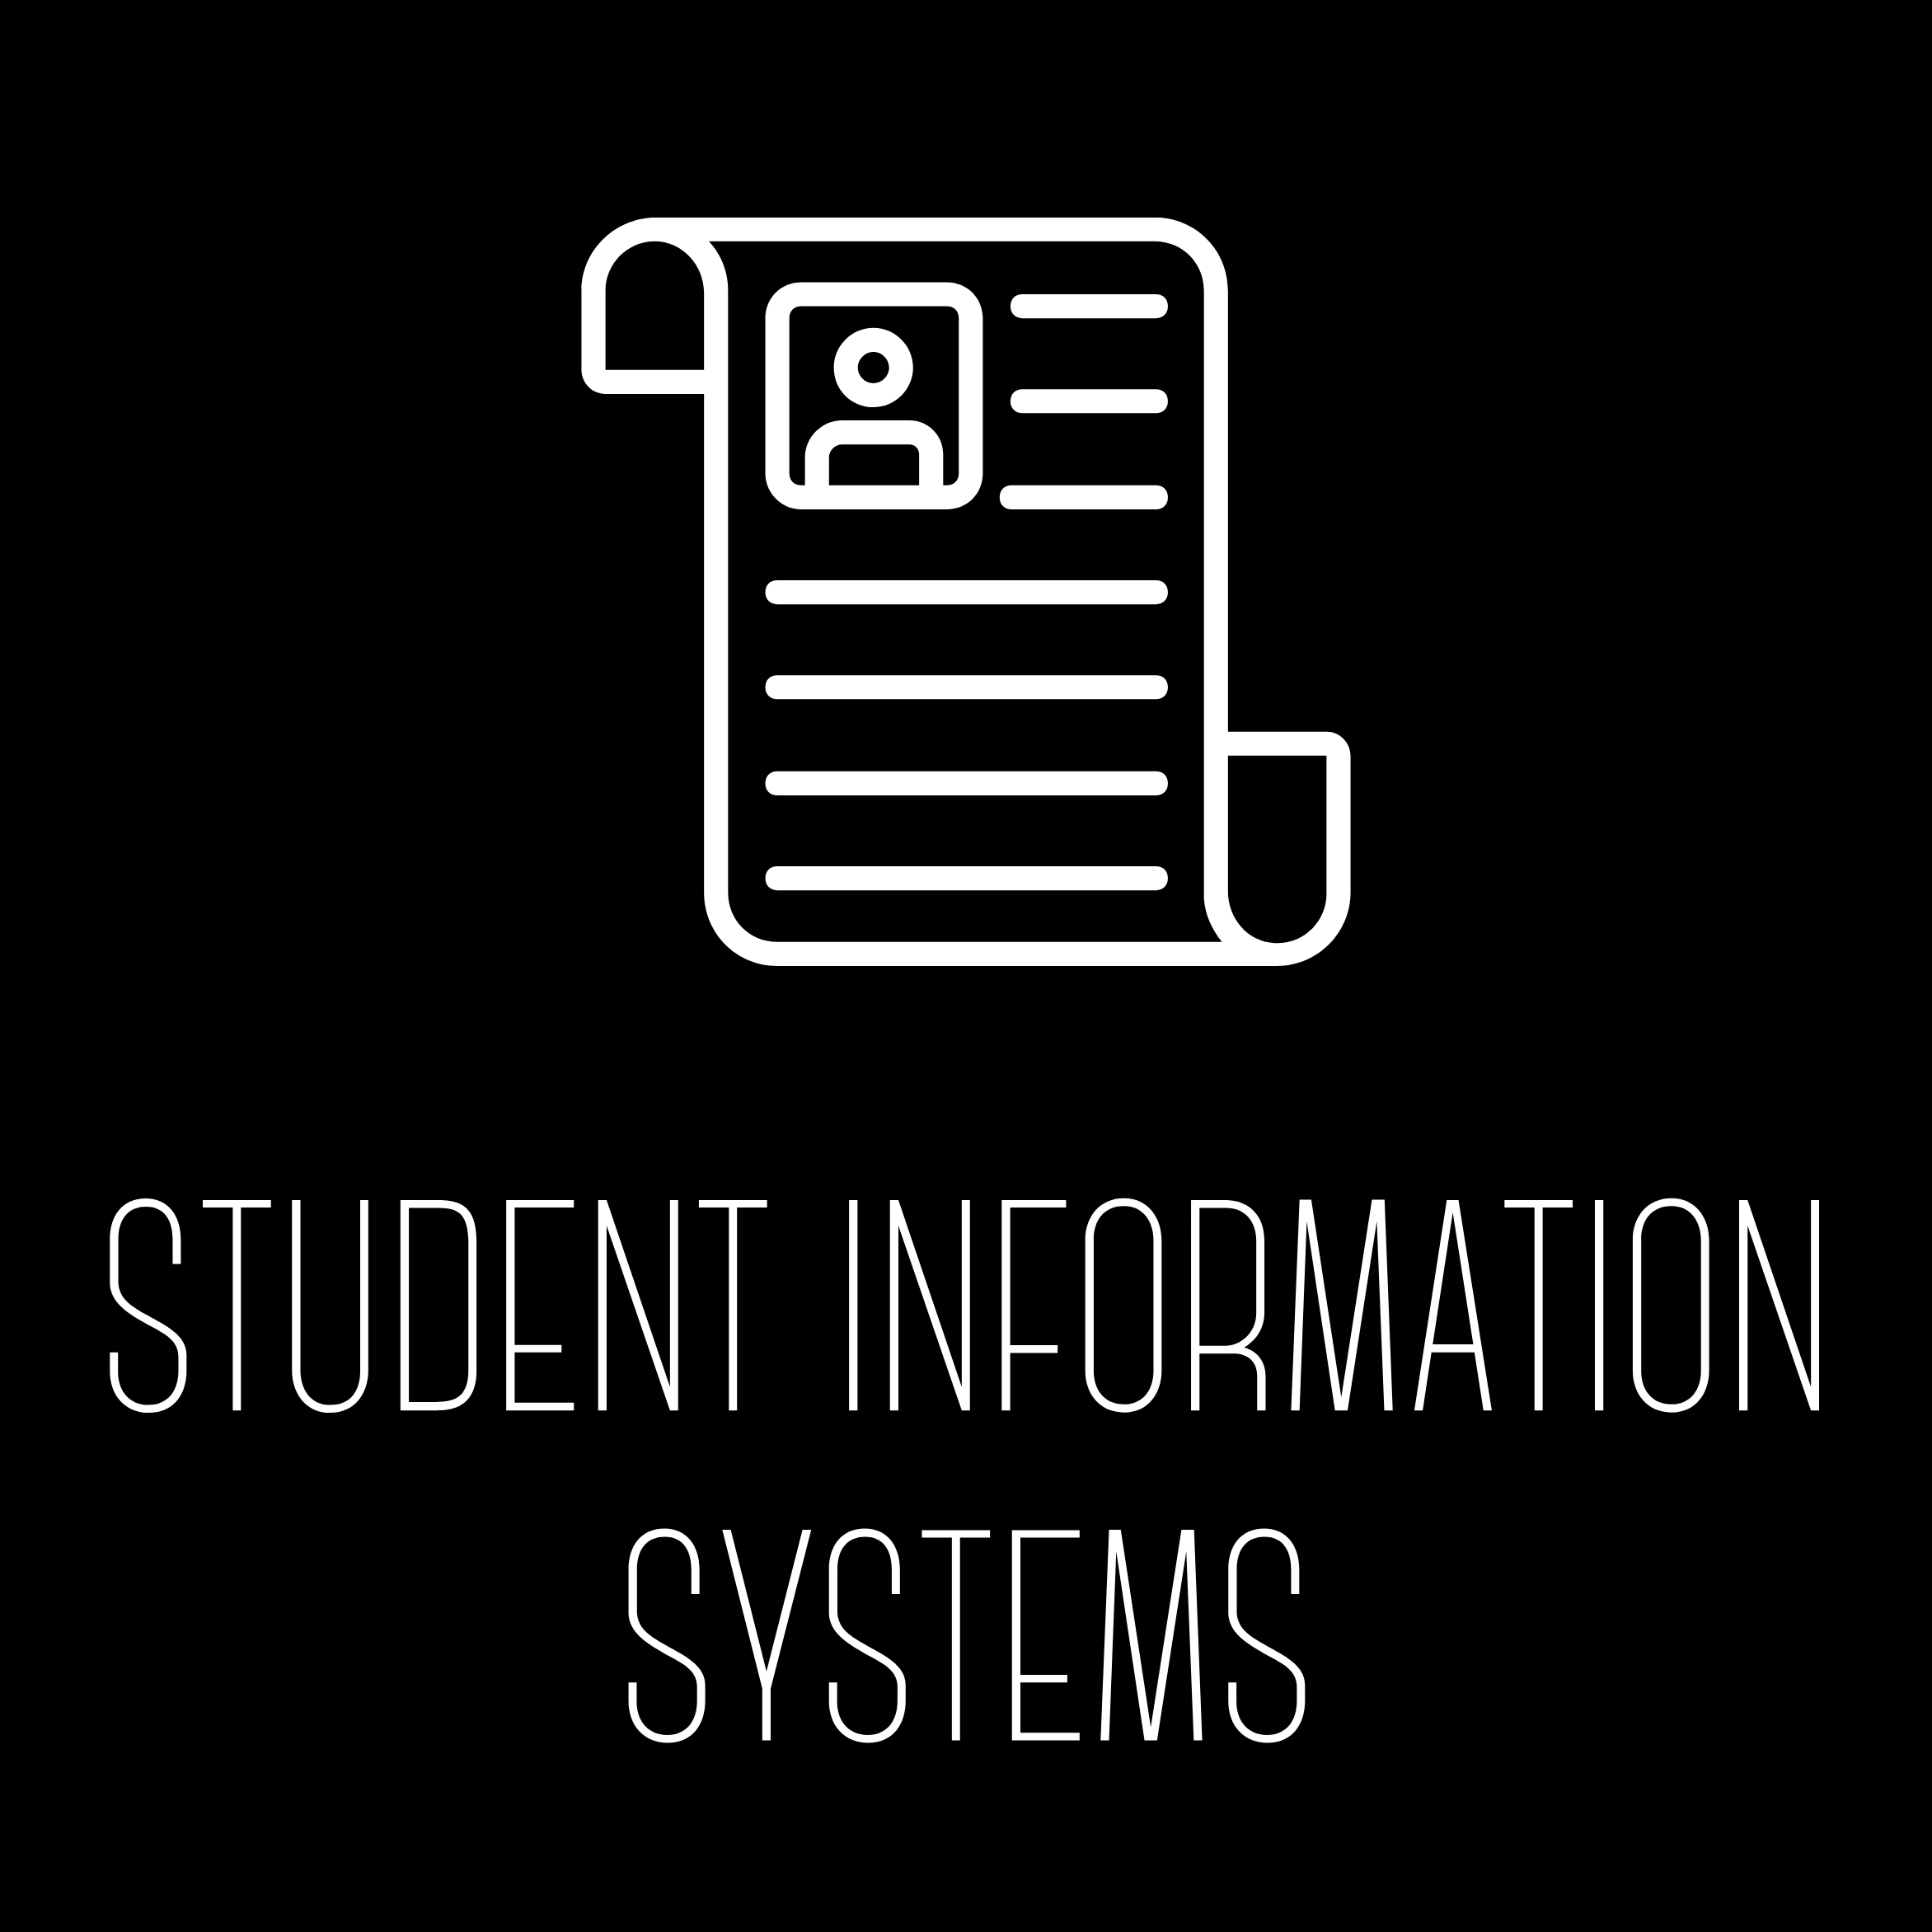 Student information systems